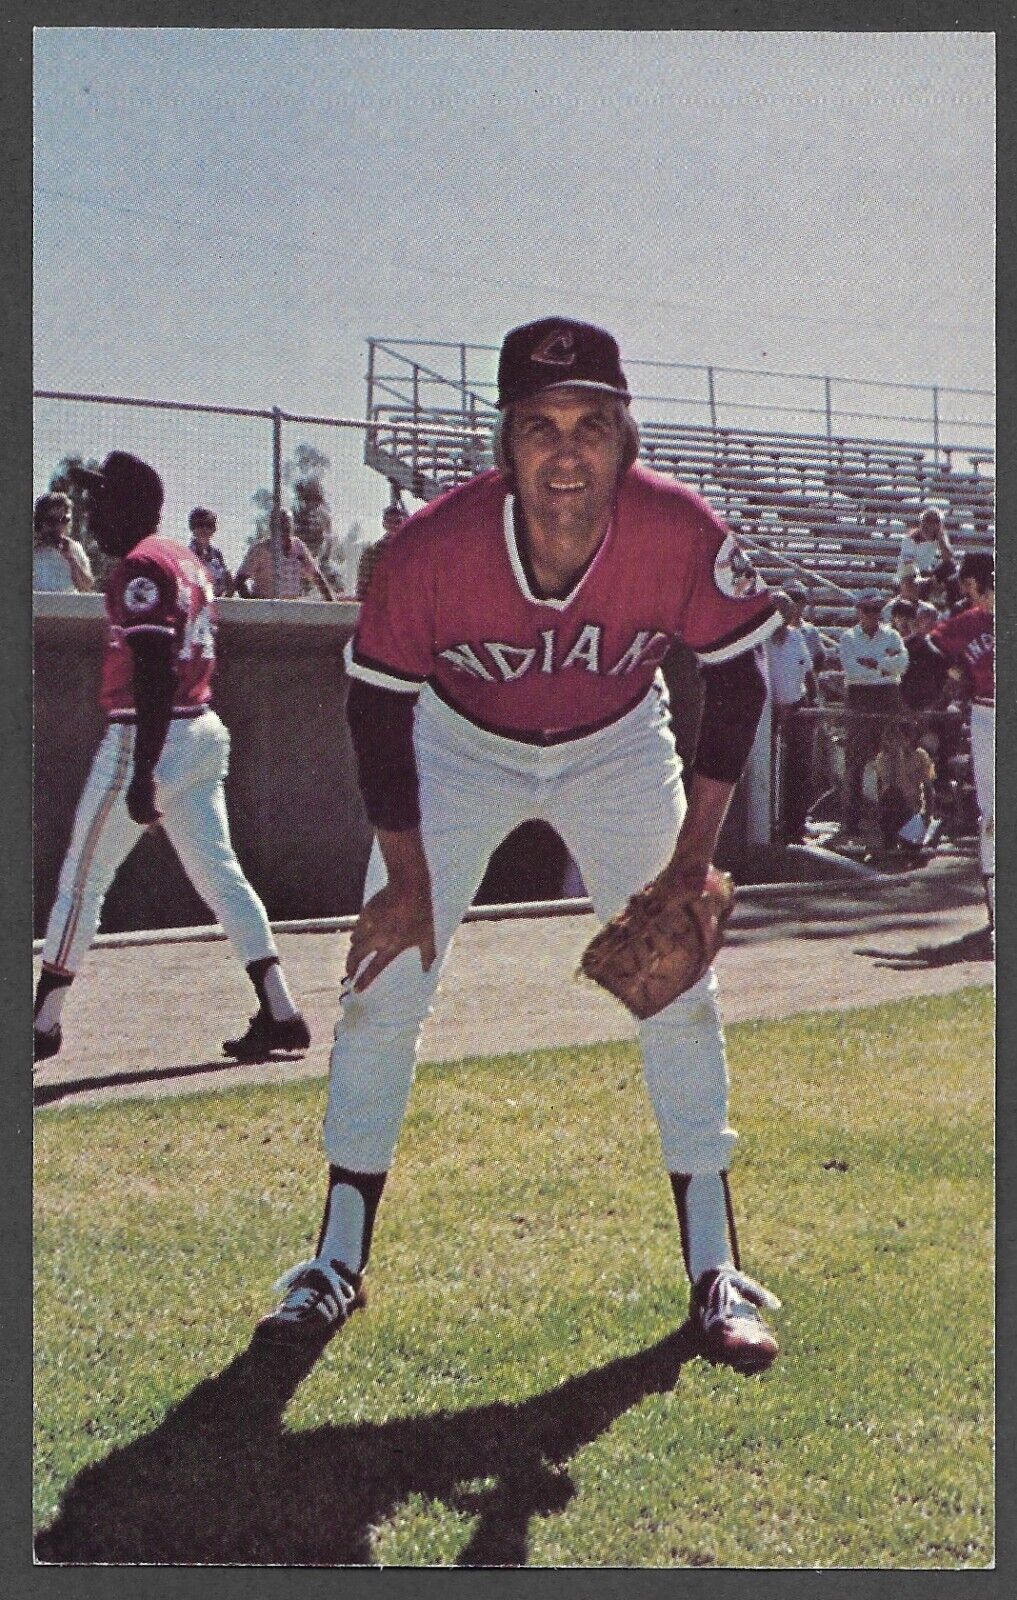 1975 Jim Perry  INDIANS  UNSIGNED  3-3/8 x 5-3/8  Team Issue PHOTO POSTCARD #3